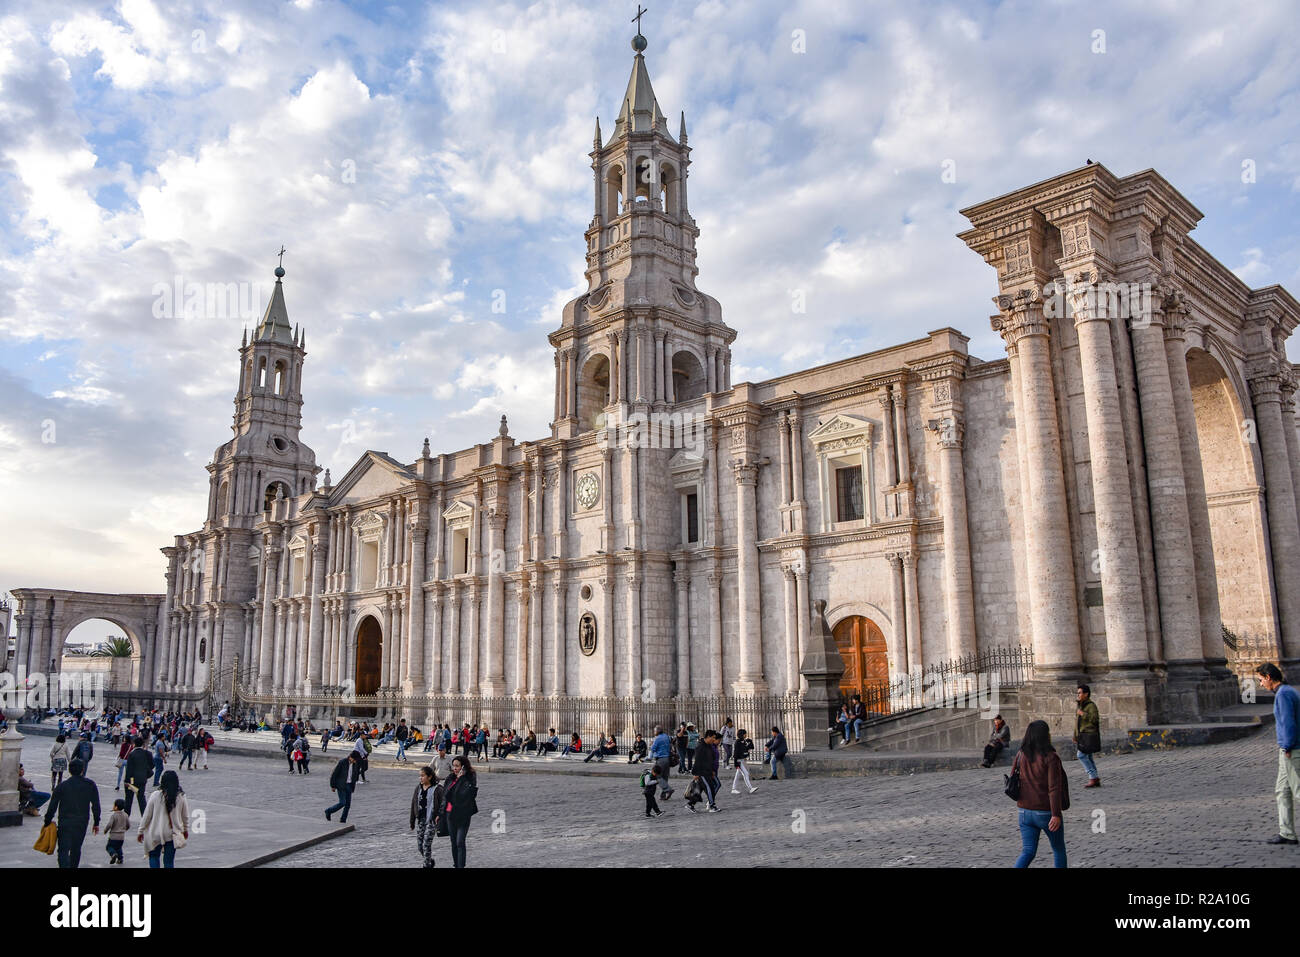 The Basilica Cathedral of Arequipa in Plaza de Armas, Peru, South America. Stock Photo